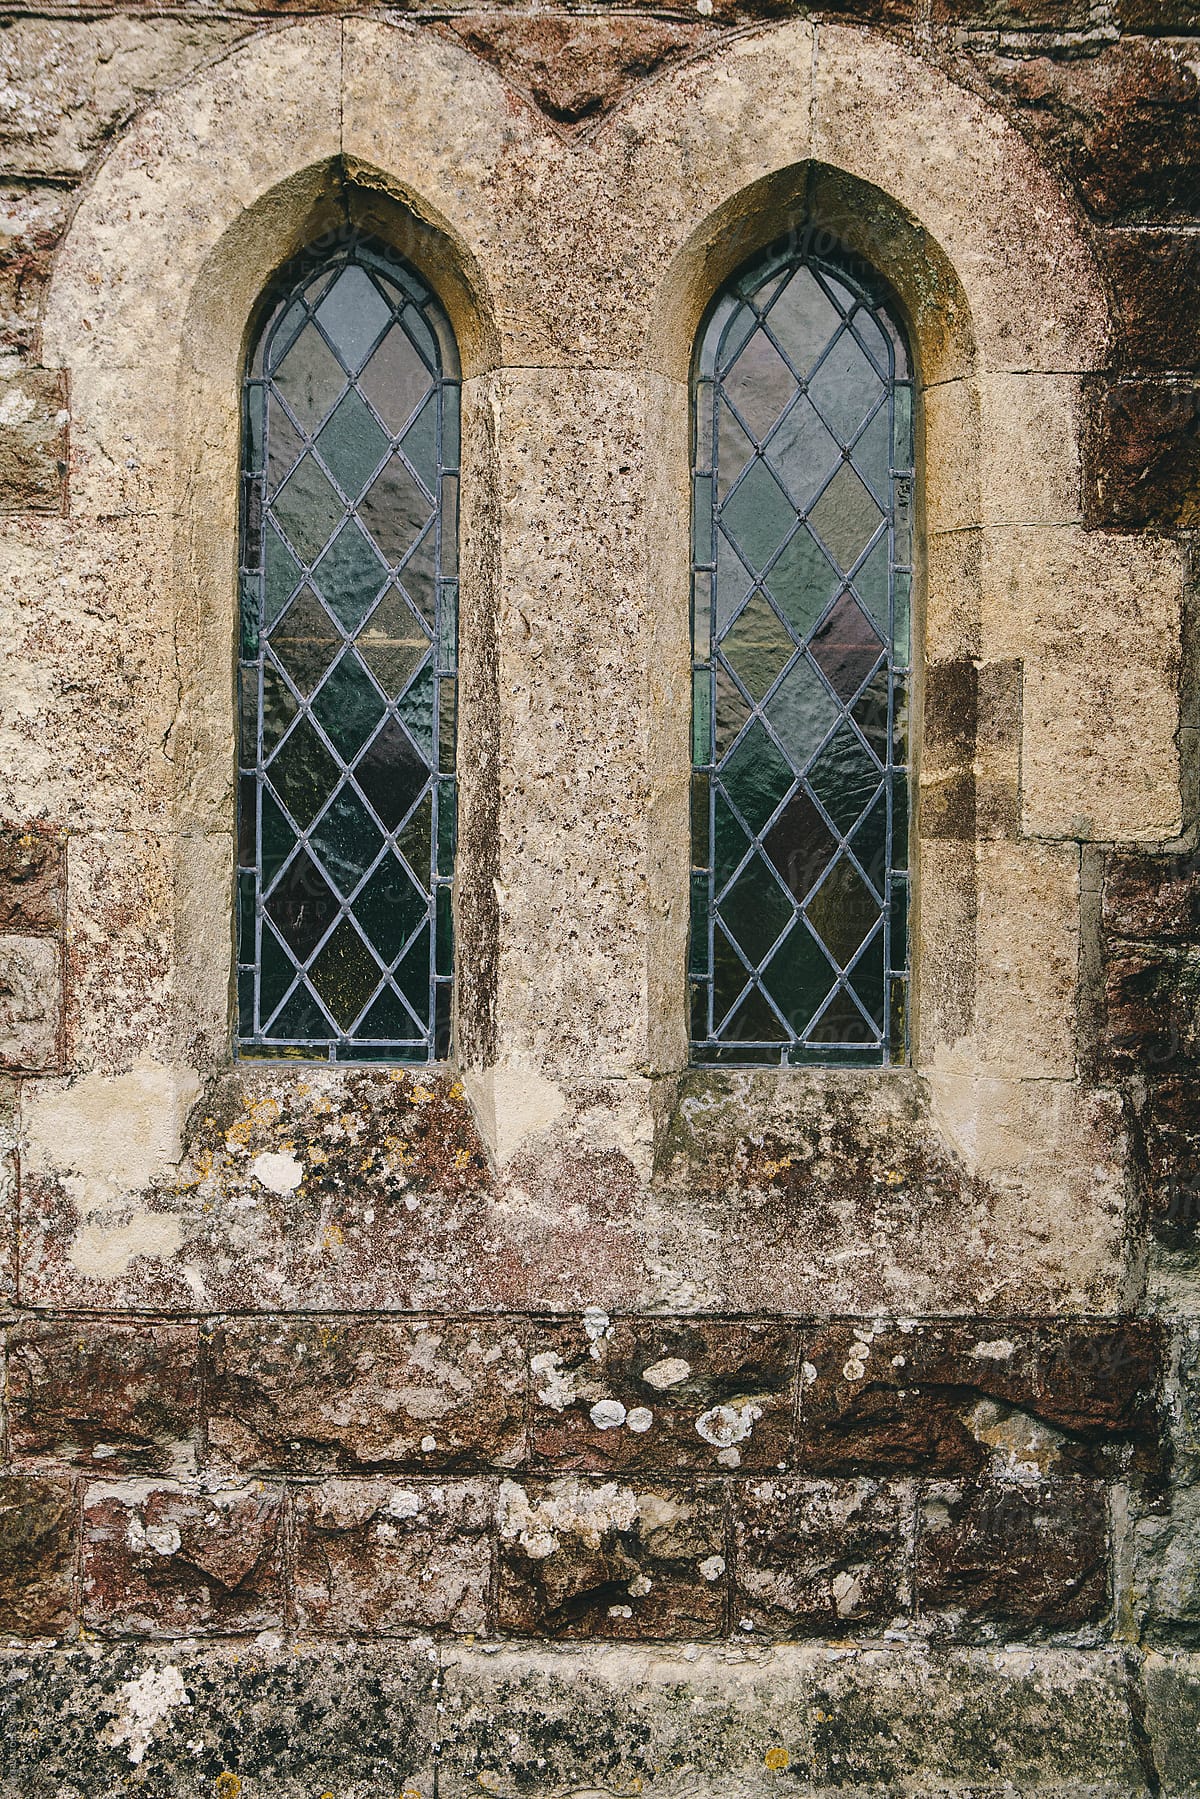 Windows of a one thousand year old british church